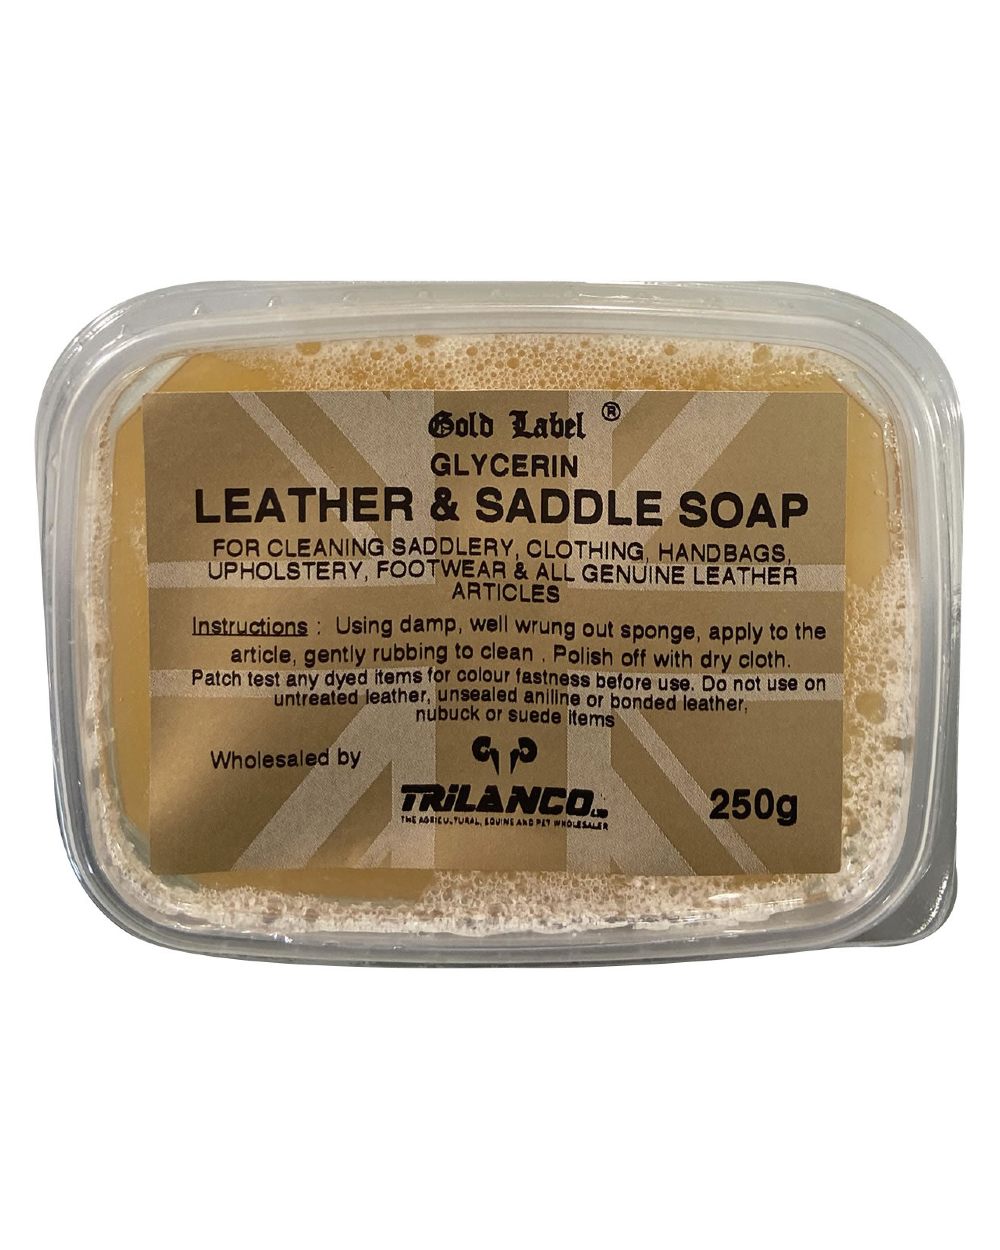 Gold Label Glycerin Leather And Saddle Soap 250g on white background